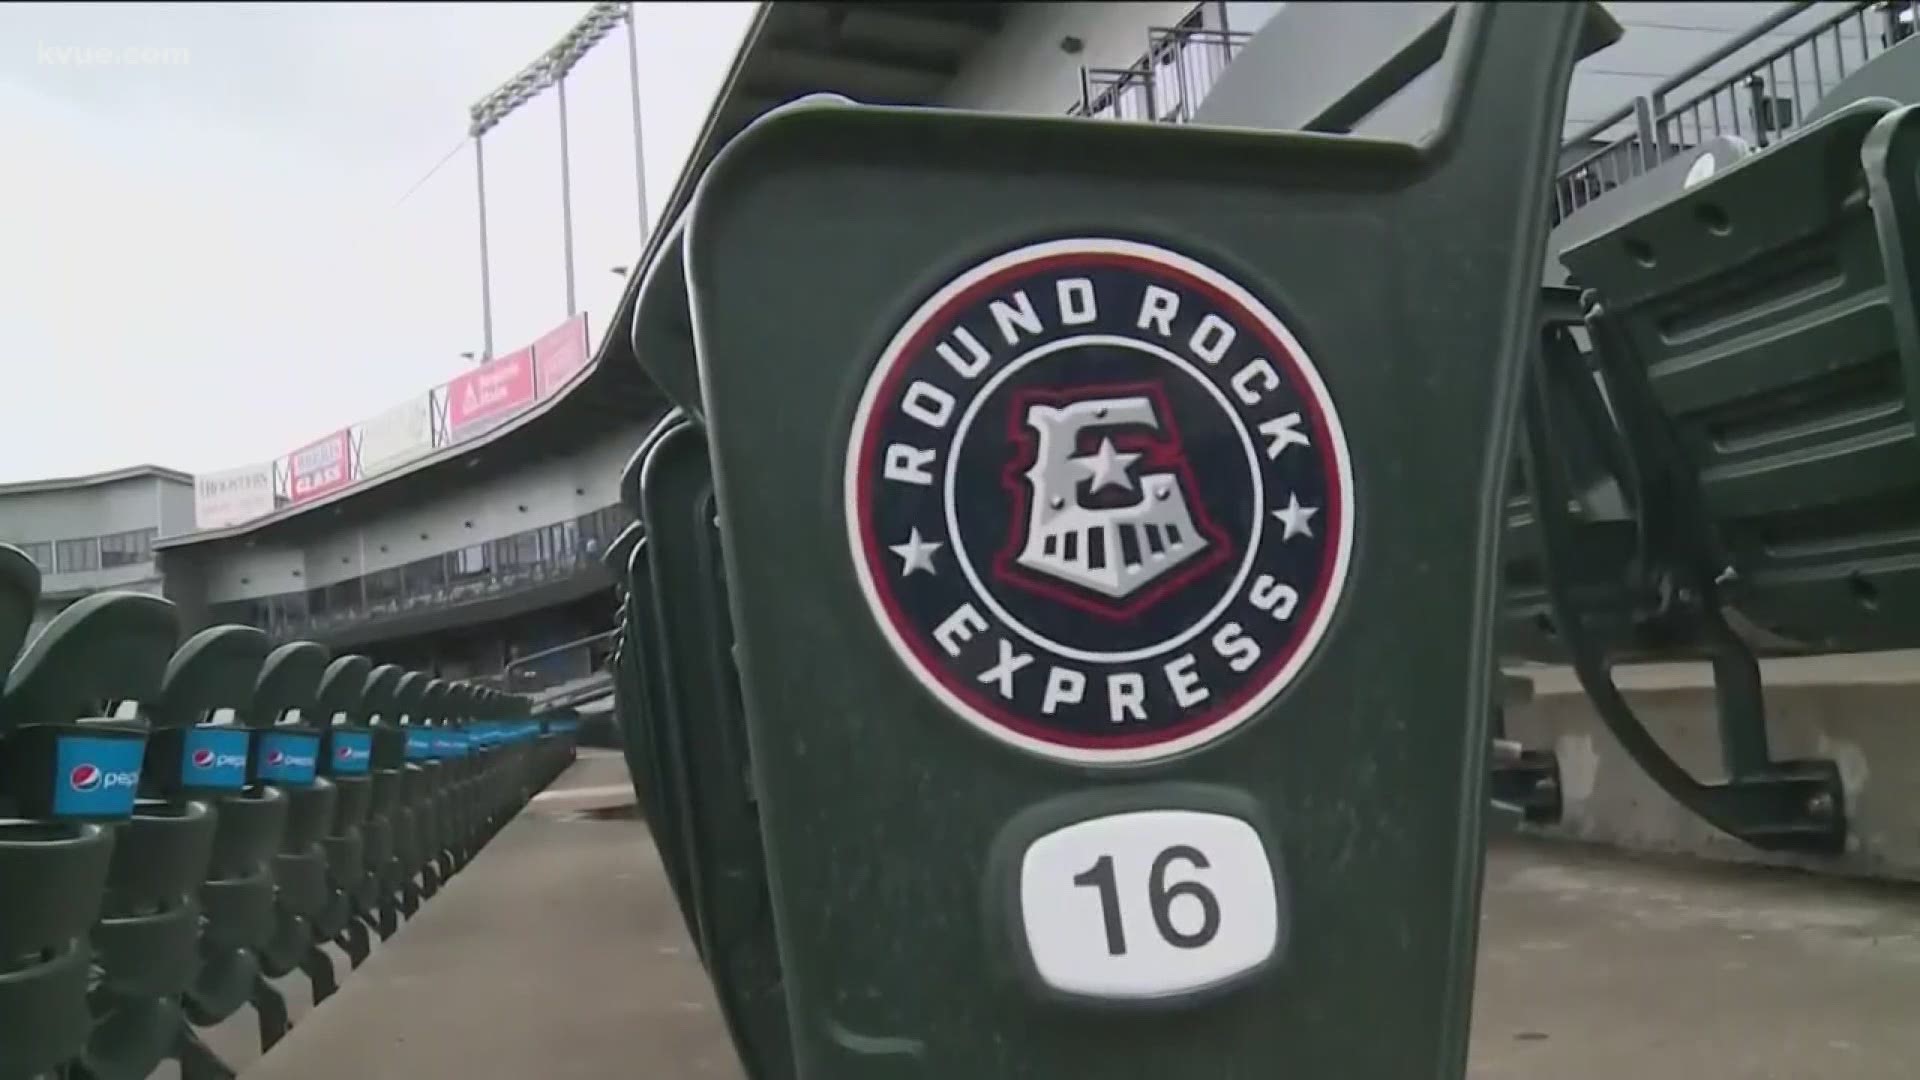 The Round Rock Express has agreed to be the Triple-A affiliate of the Texas Rangers for the next 10 years.